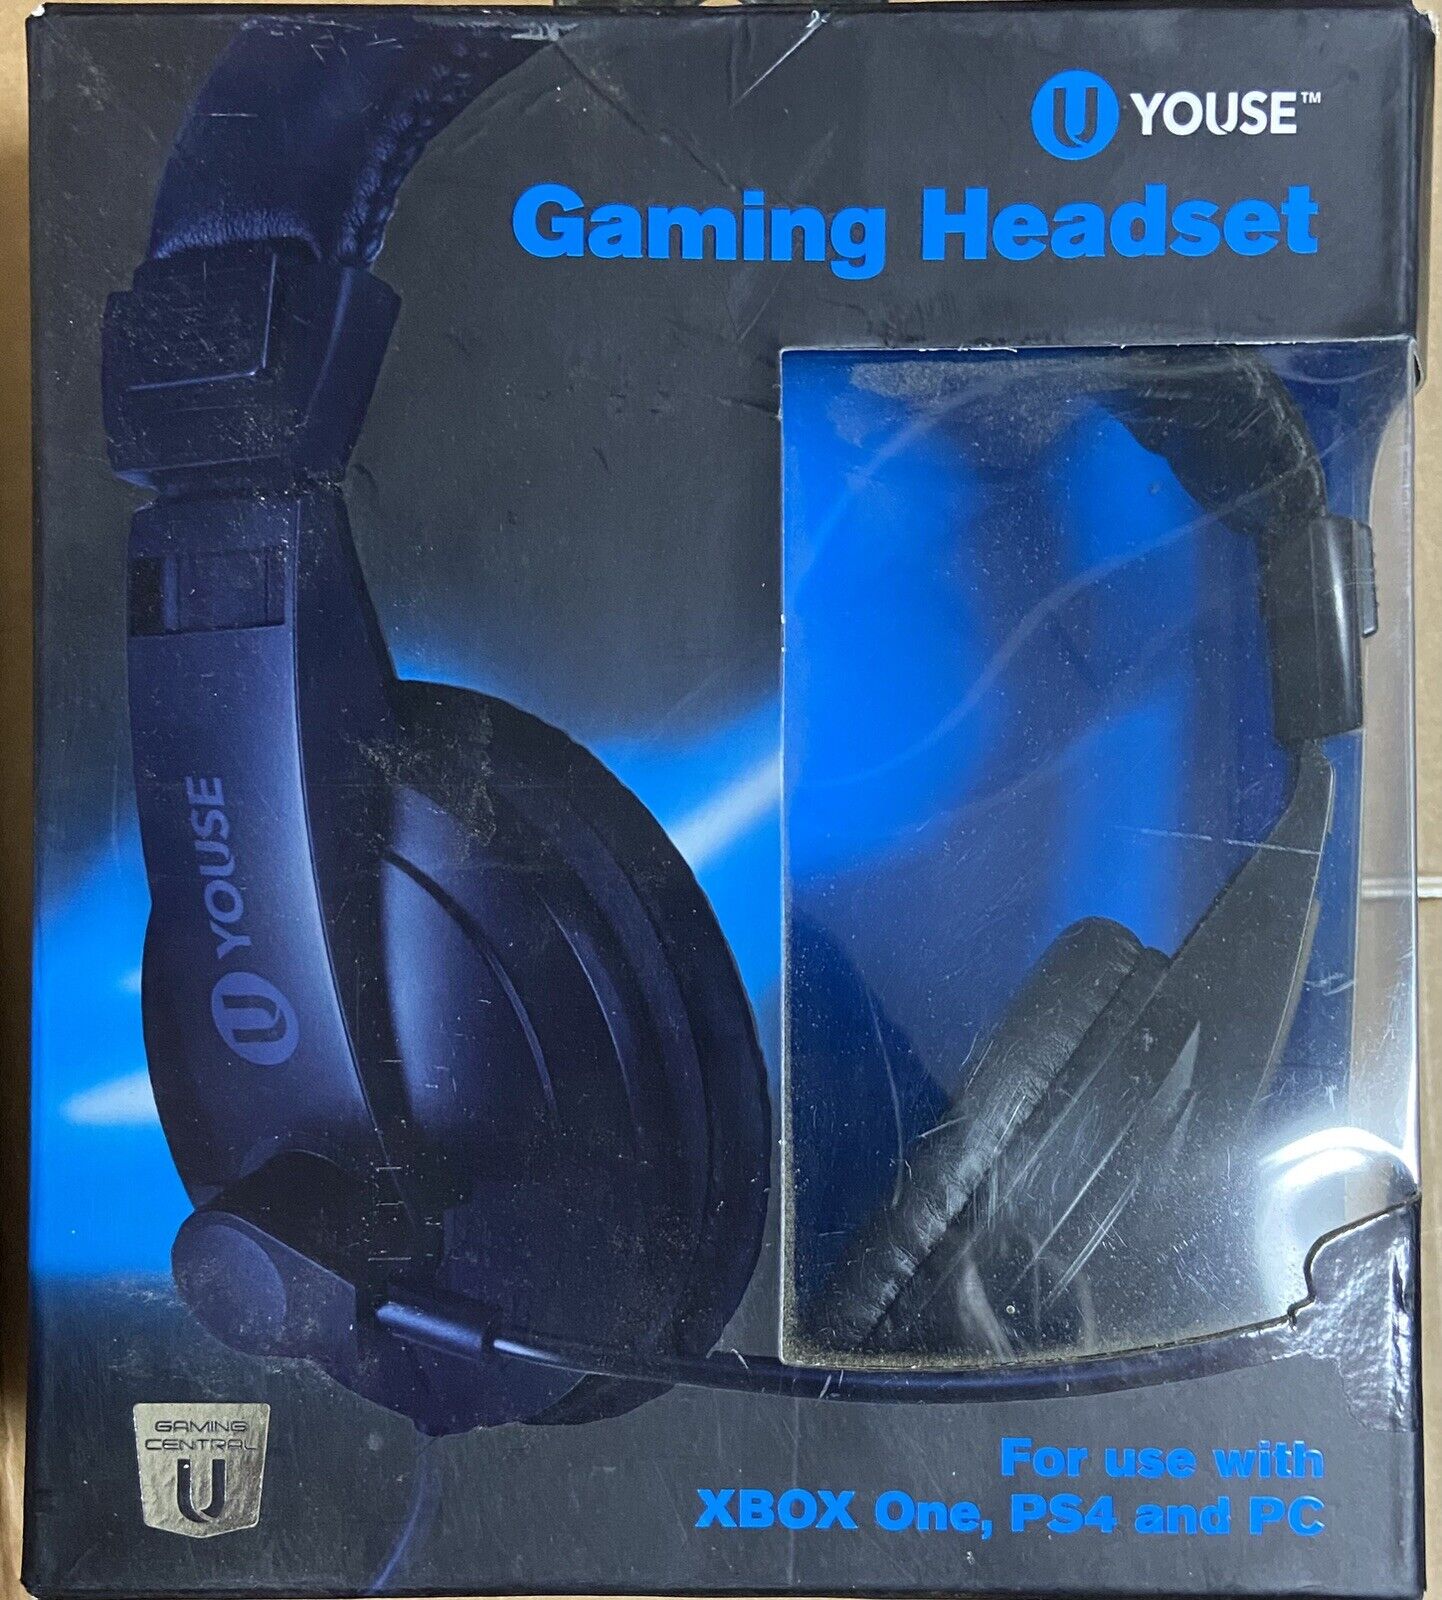 U Youse Gaming Headset Xbox One, PS4, and PC, with Built in Mic - New